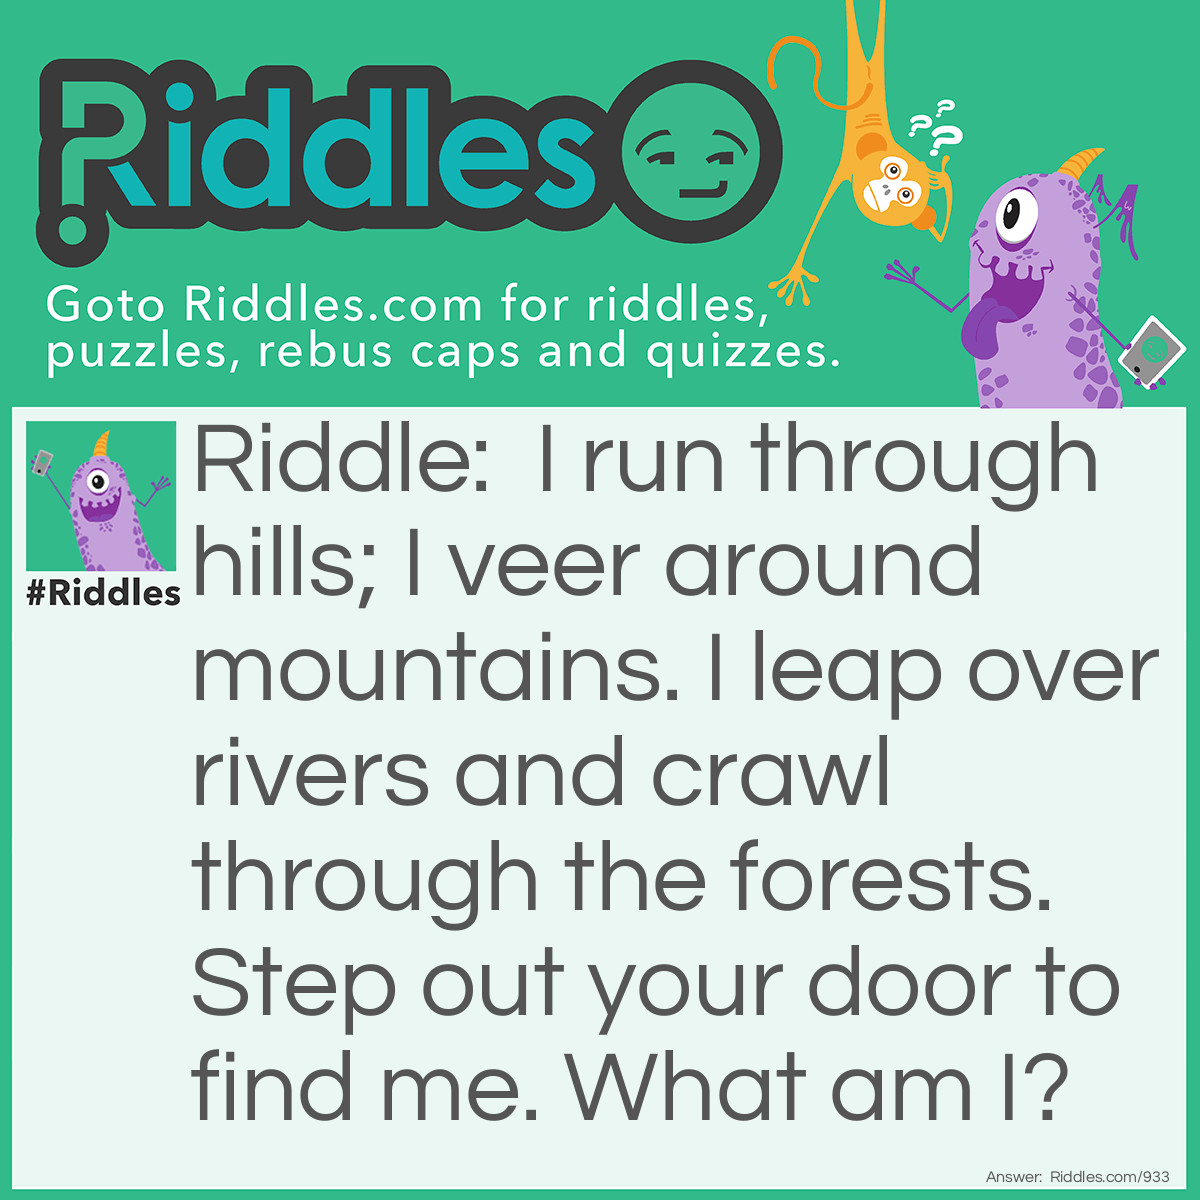 Riddle: I run through hills; I veer around mountains. I leap over rivers and crawl through the forests. Step out your door to find me.
What am I? Answer: Roads.